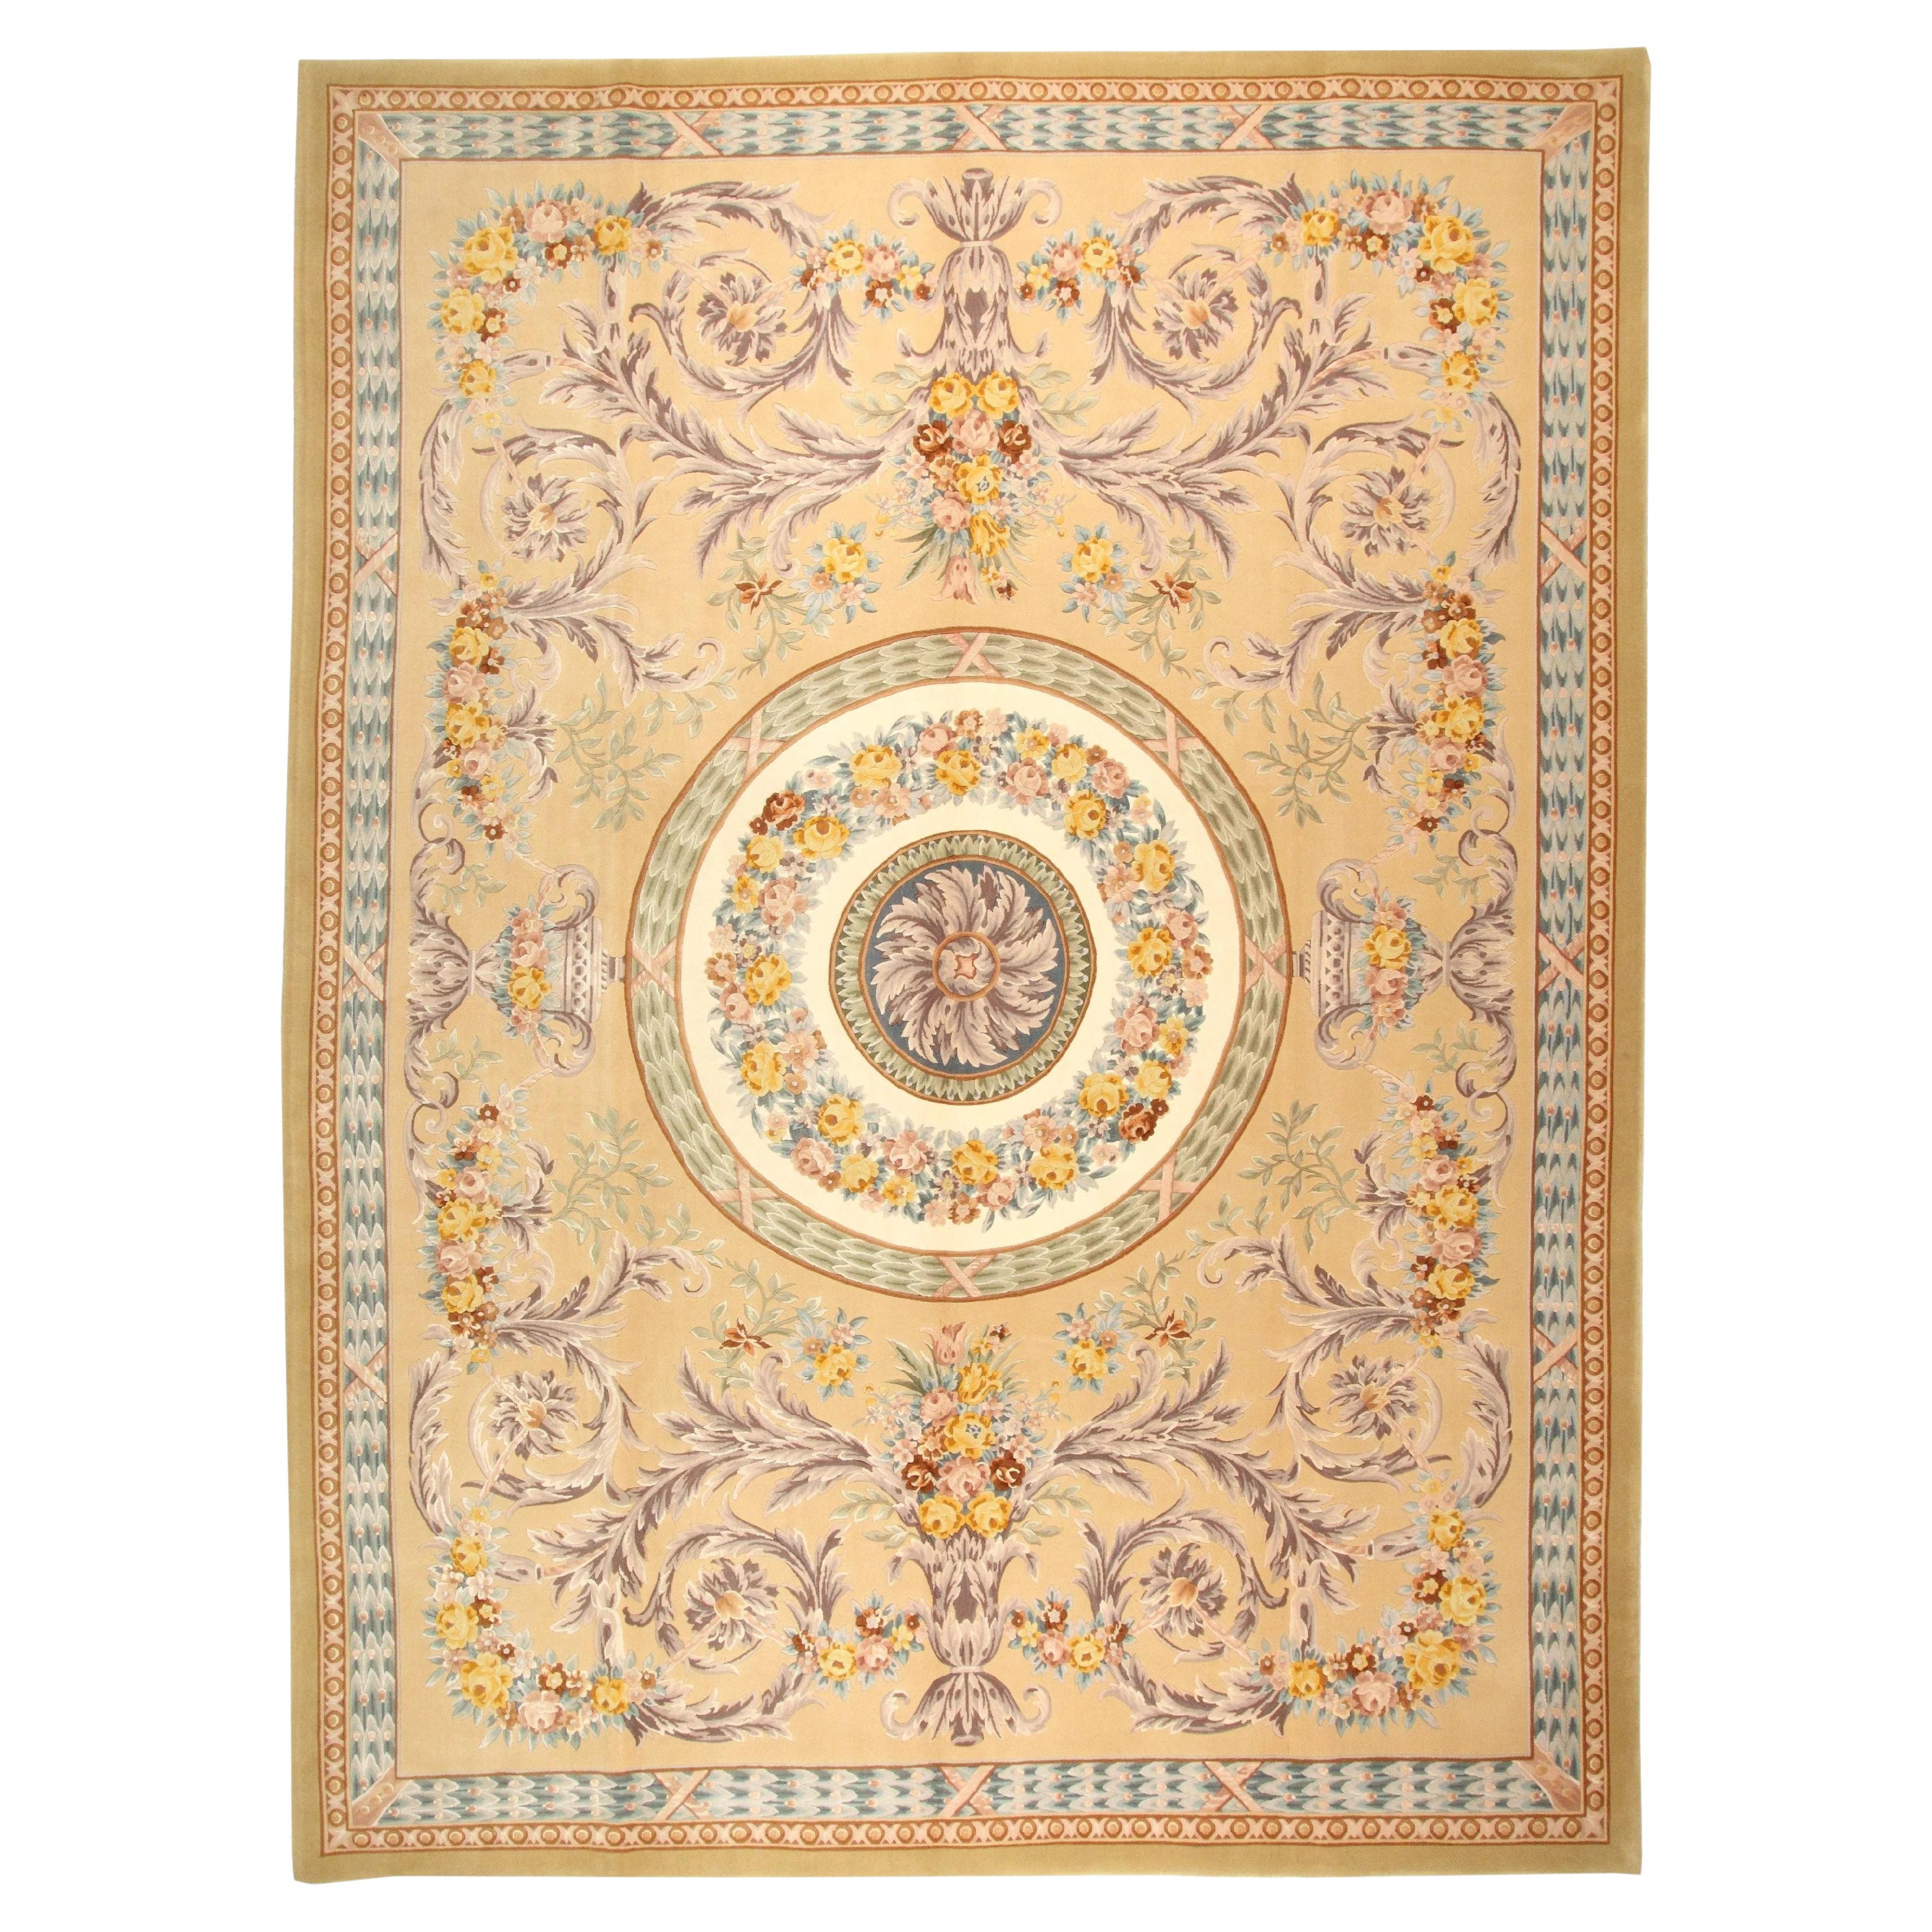 VIA COMO 'Granarie' Wool & Silk Hand Knotted Rug Carpet 10x13 One of a Kind RARE For Sale